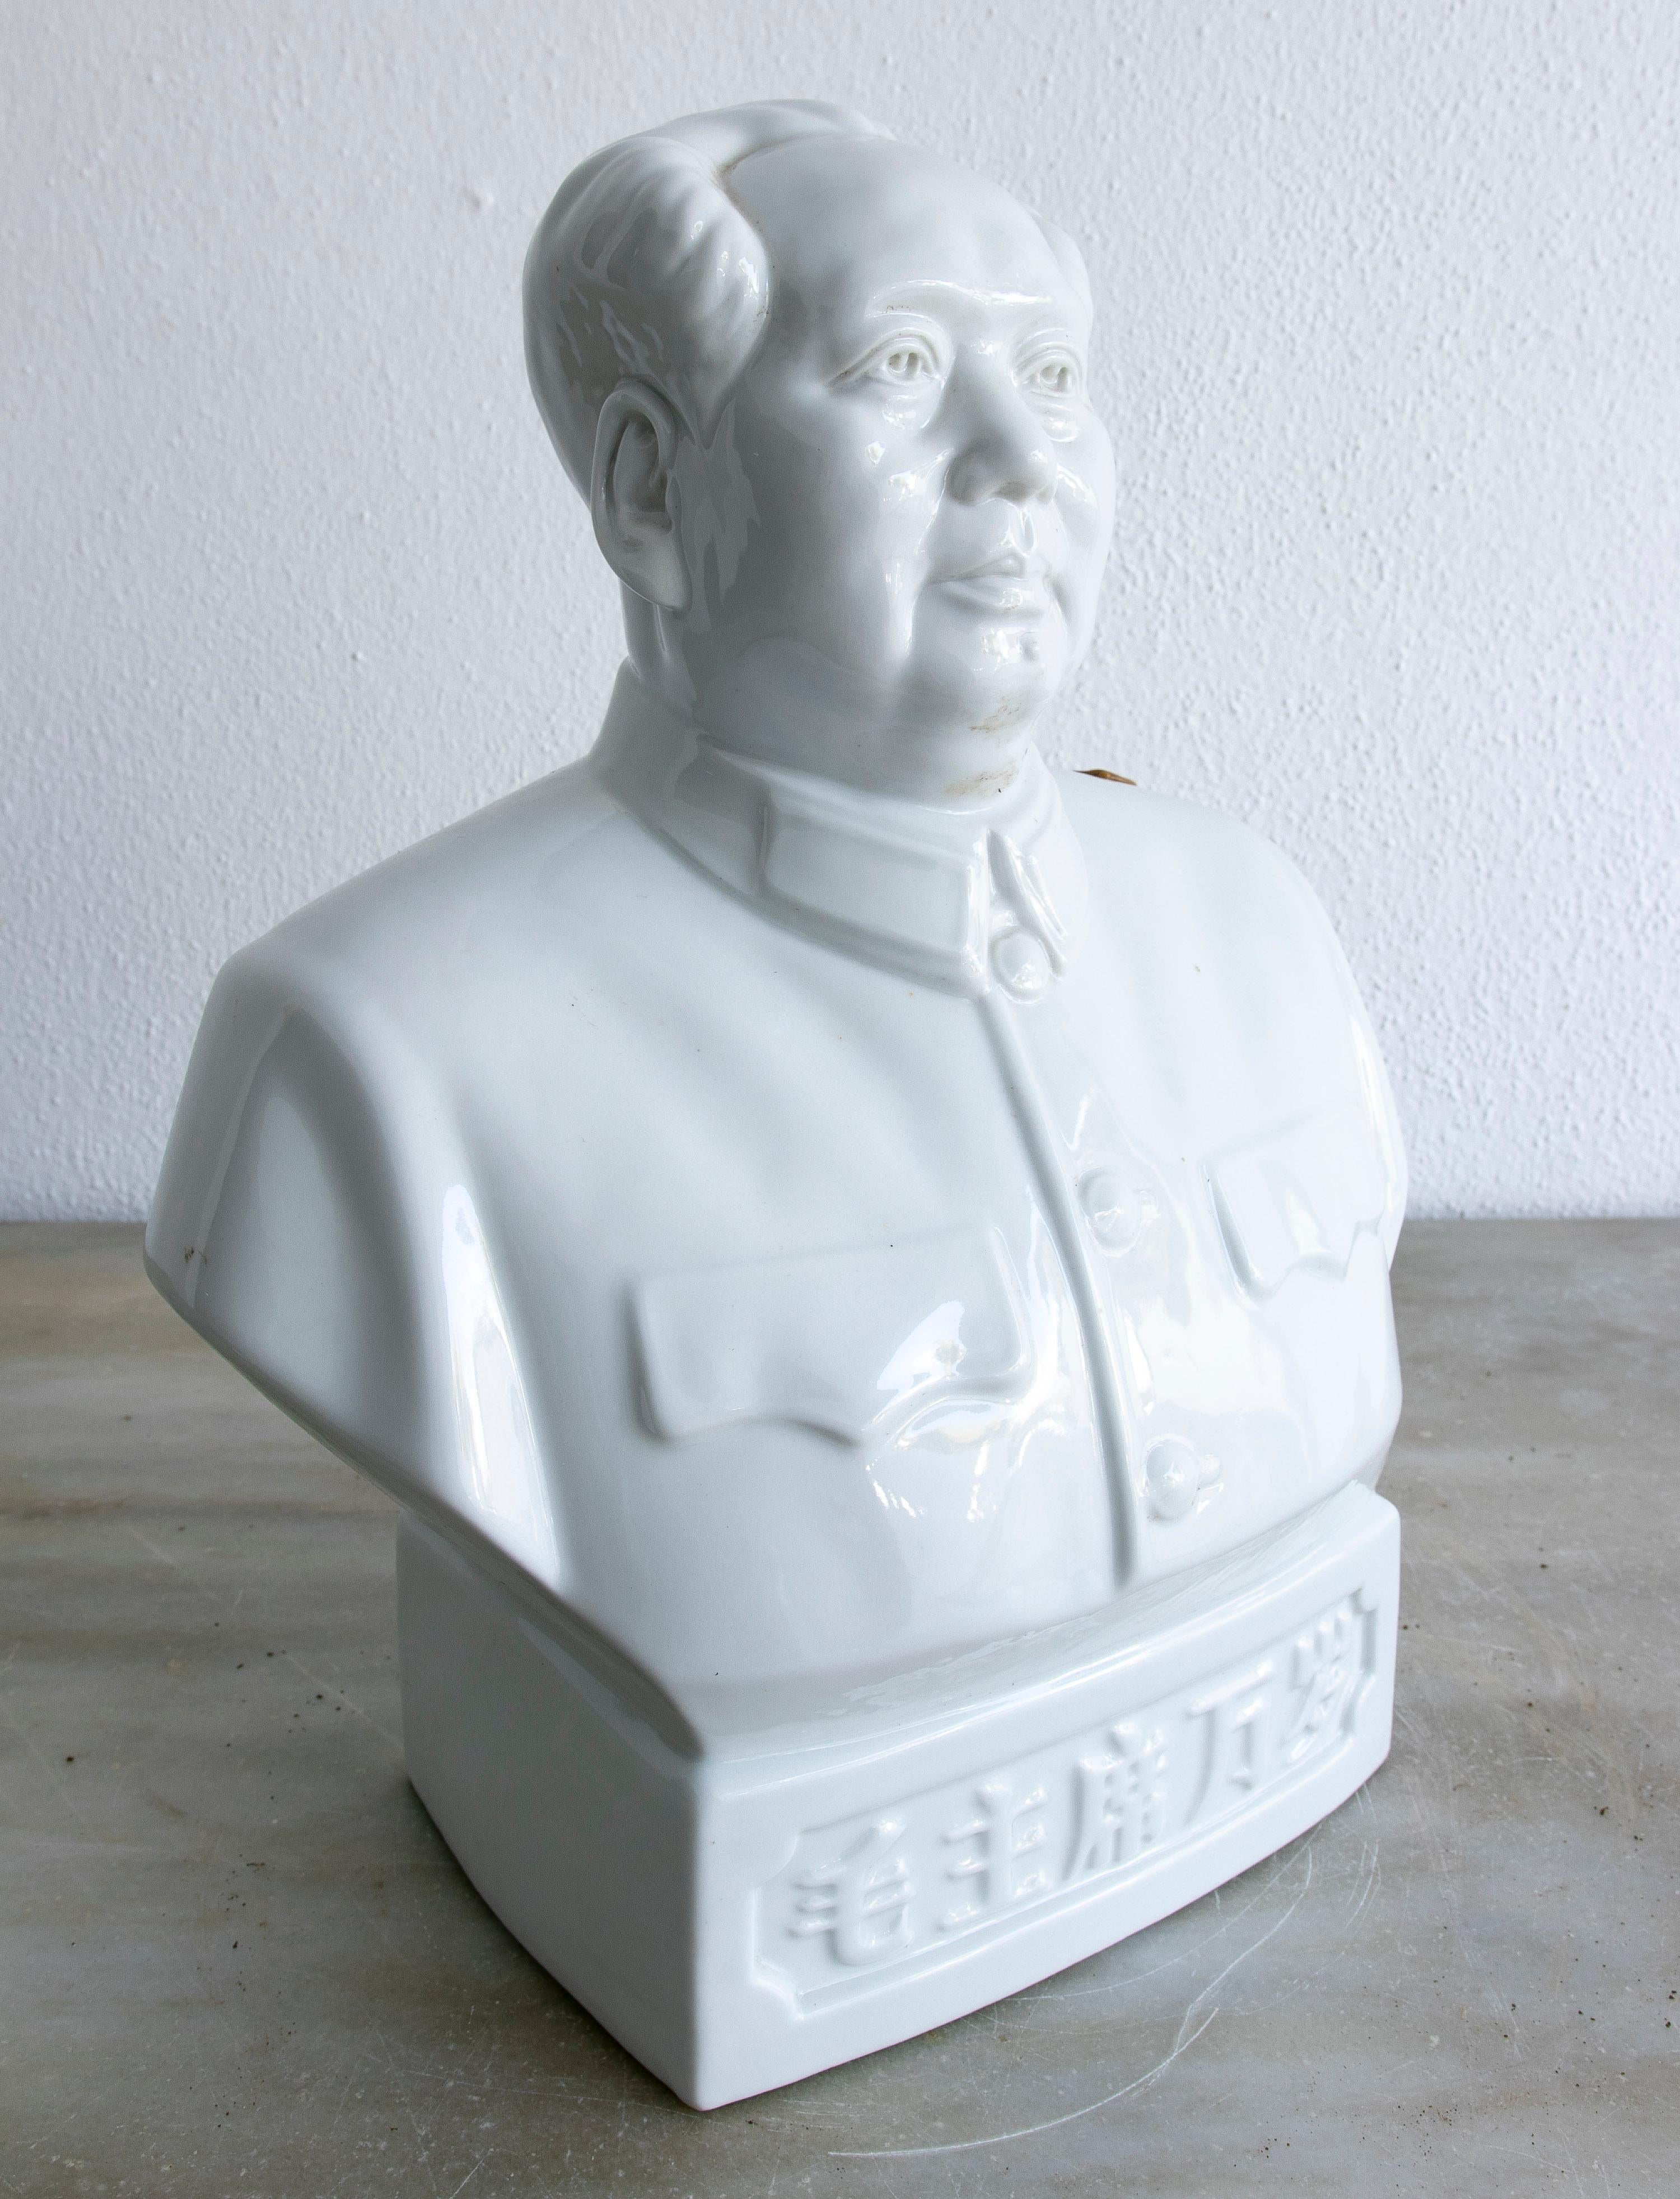 1990s Chinese porcelain figure bust of Mao Zedong, with stamp from Chinese customs authorizing its export.